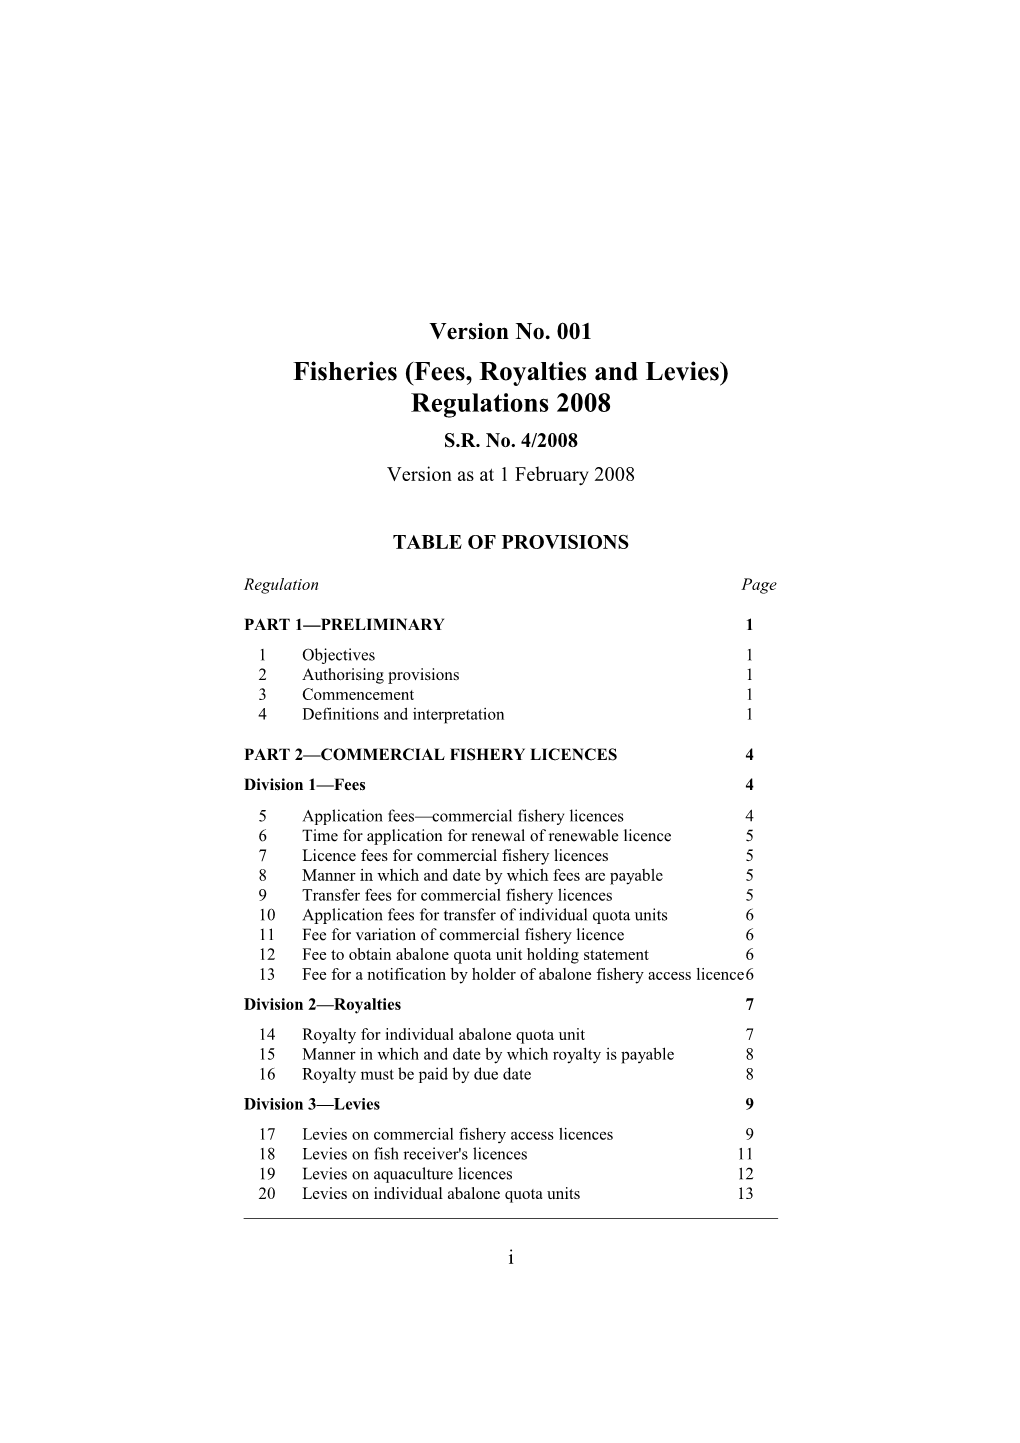 Fisheries (Fees, Royalties and Levies) Regulations 2008